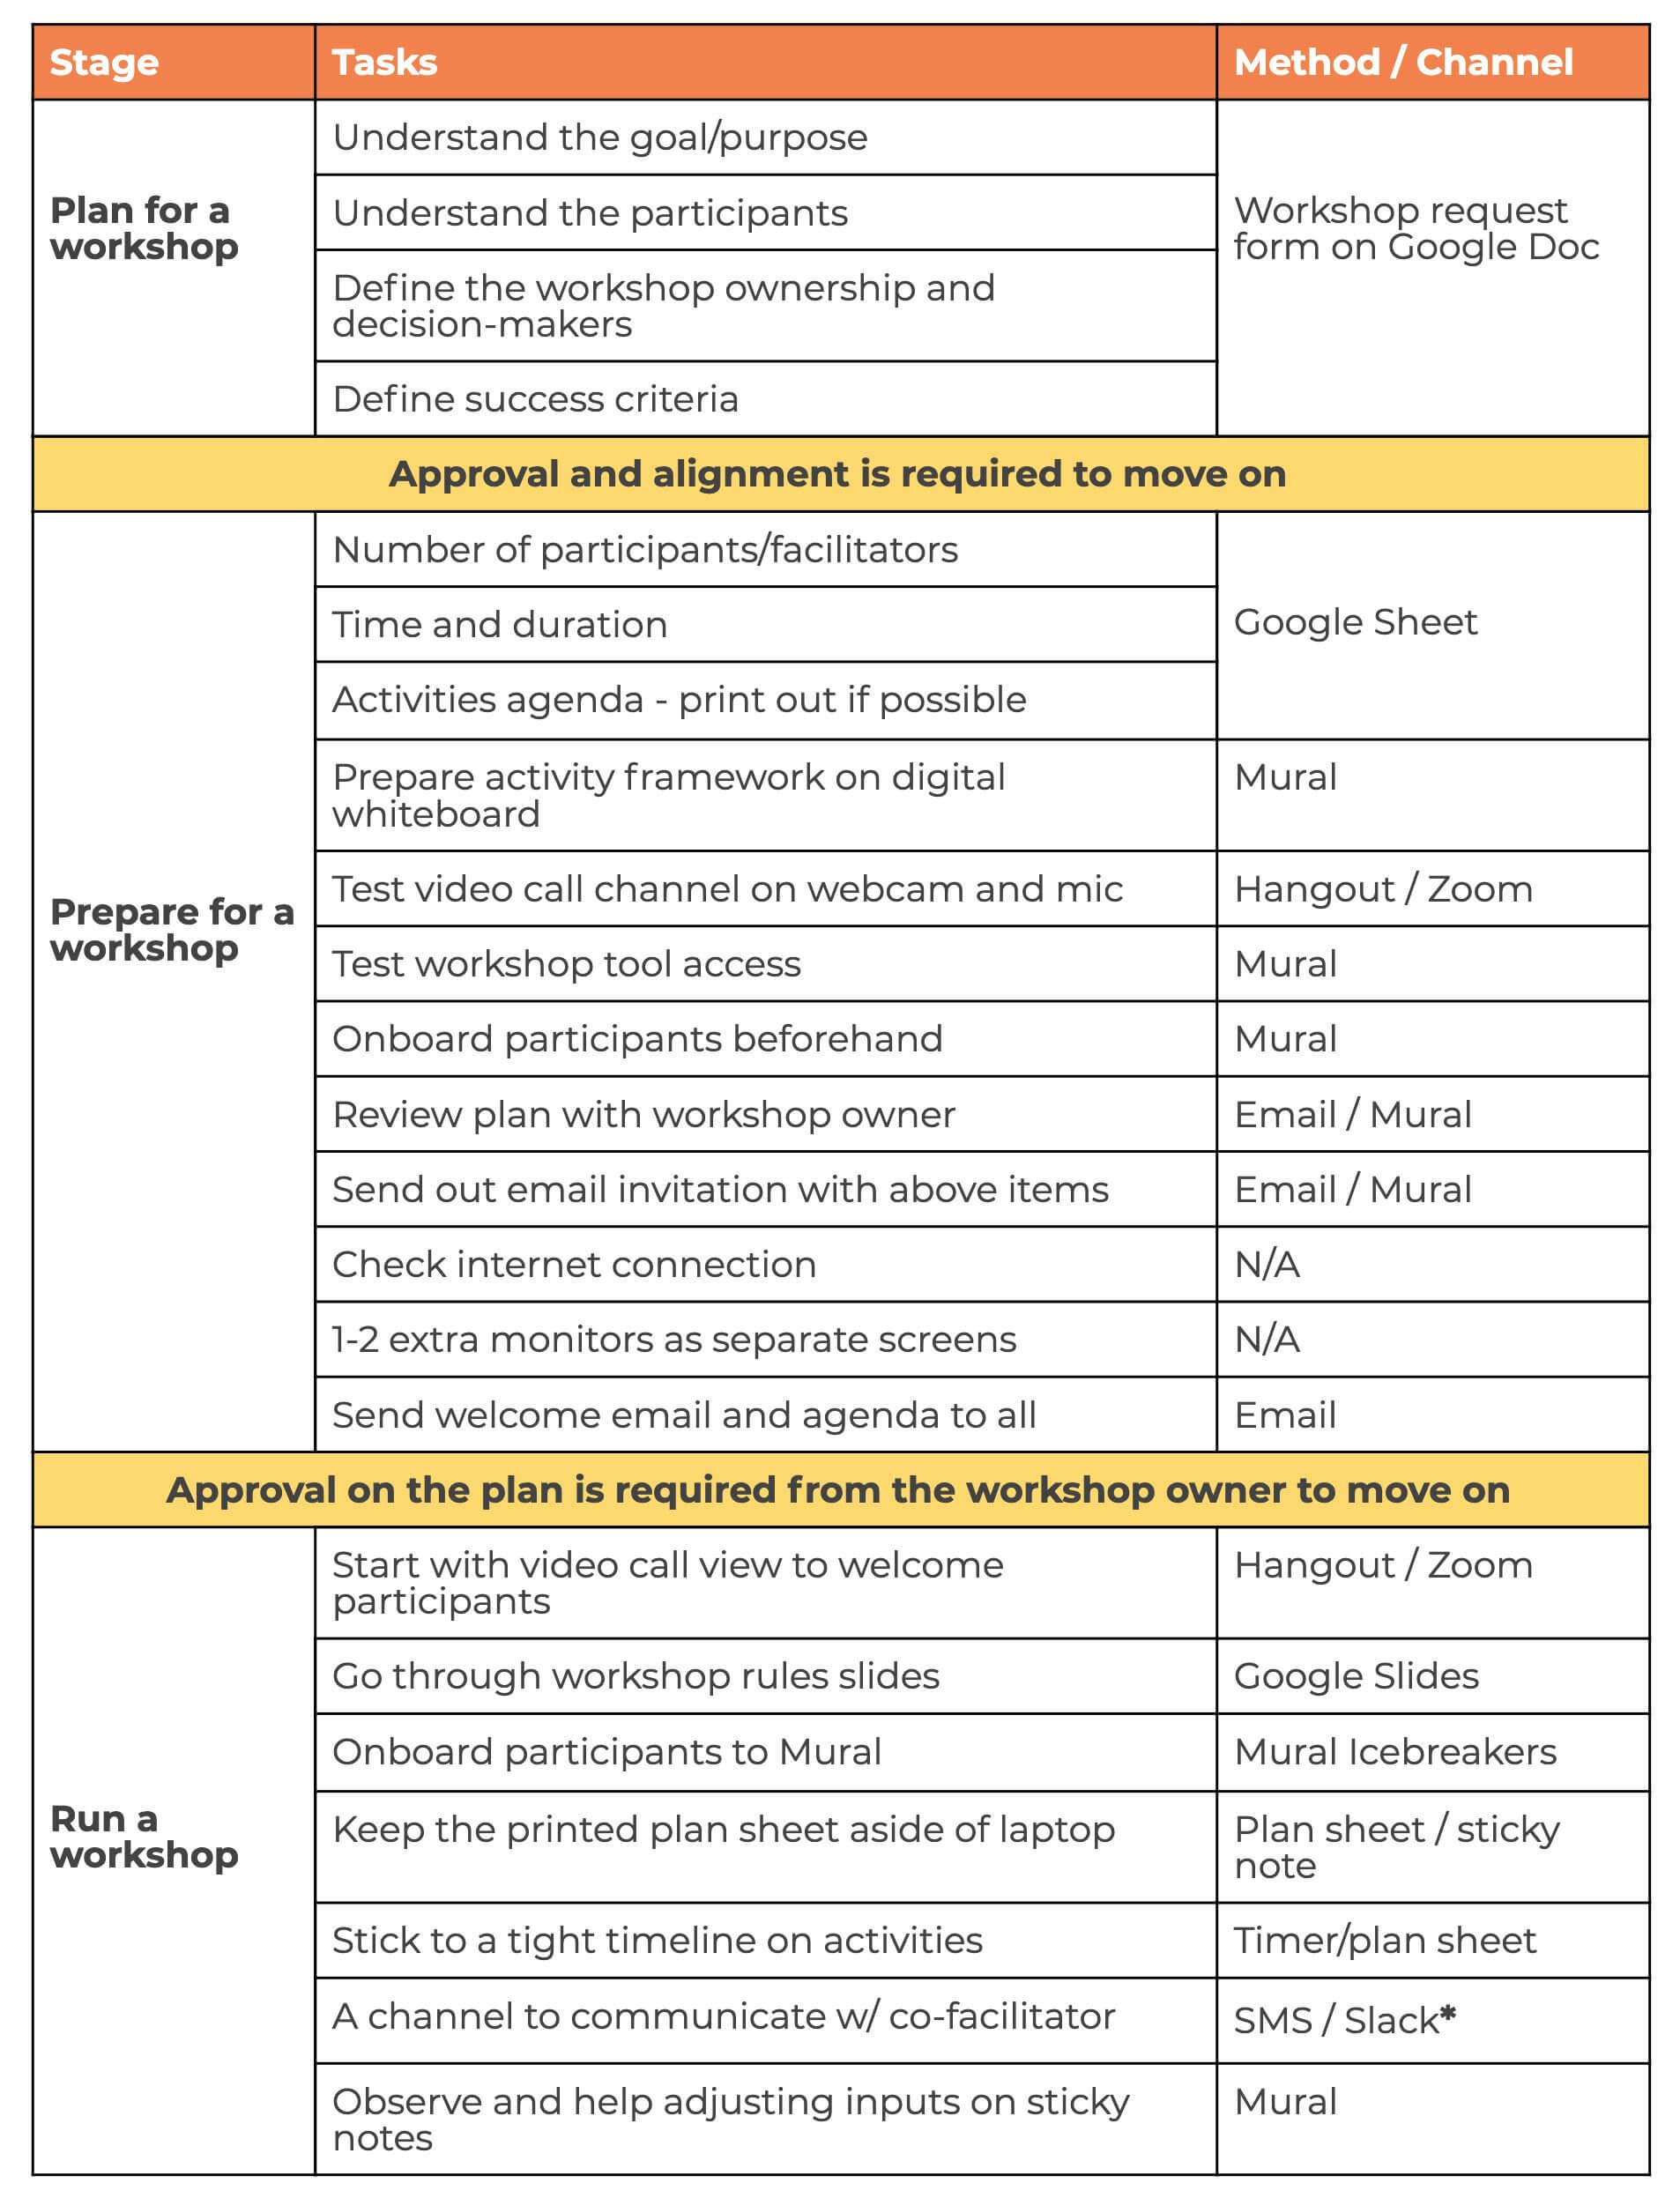 A table of checklist showing the stages, tasks, and tools, for running a remote workshop. for further information read the content below 